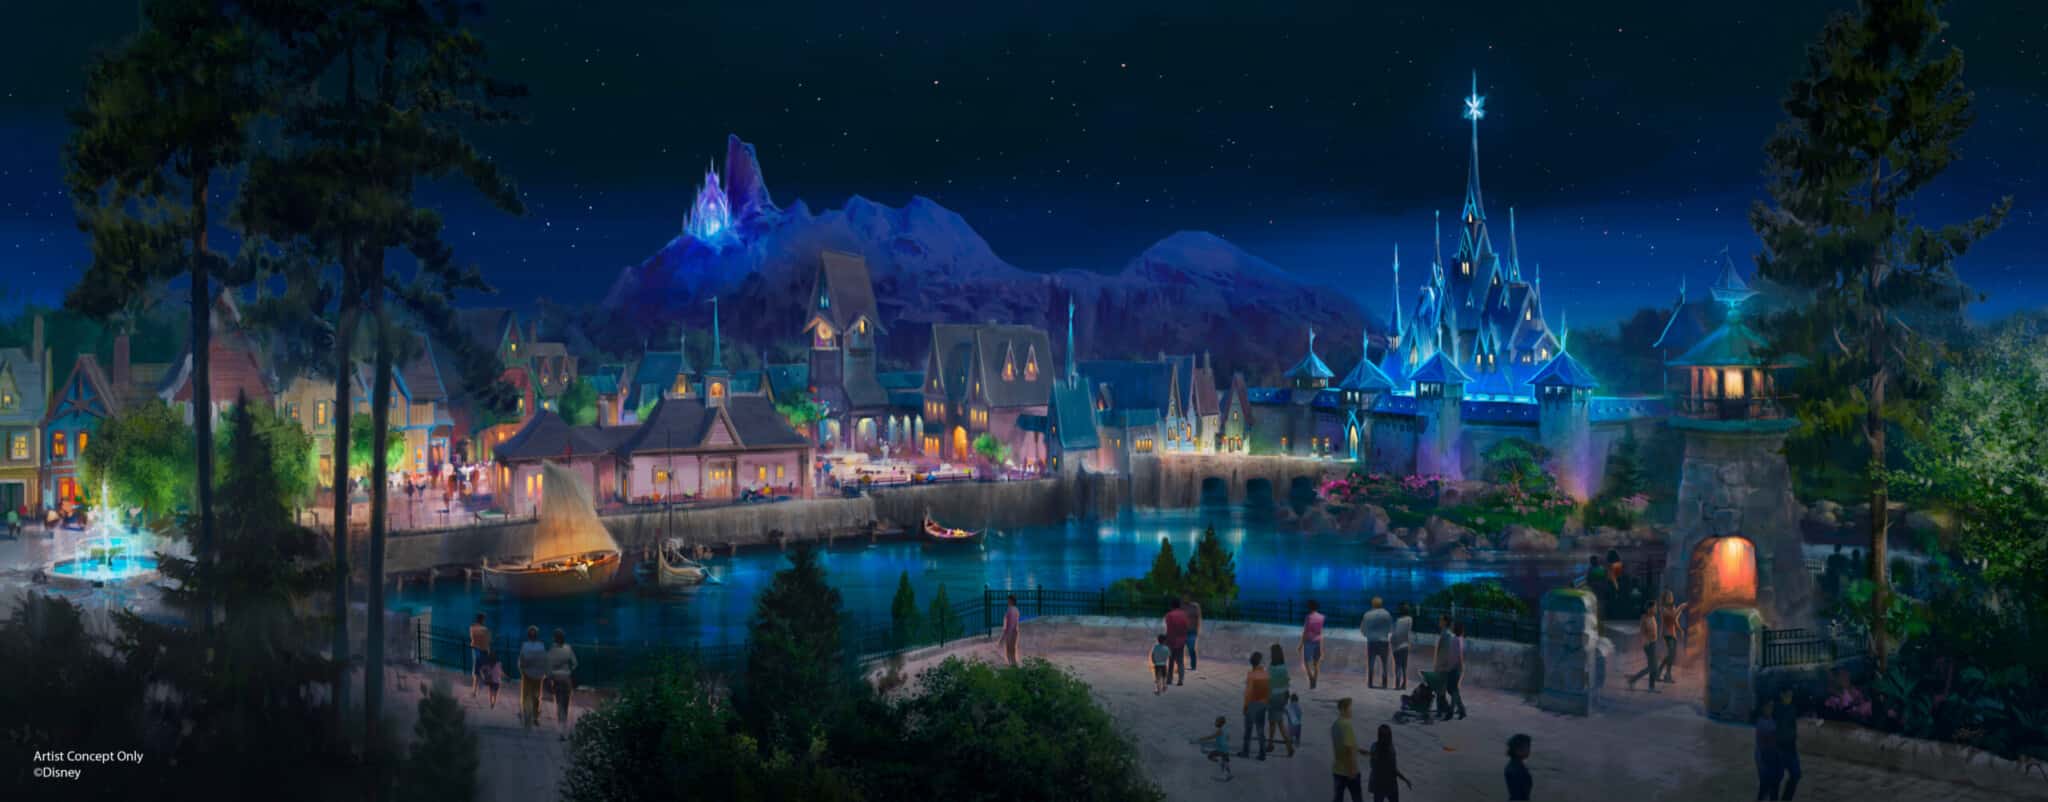 Why Launching Disneyland Paris May Be Disney's Best Ever Deal